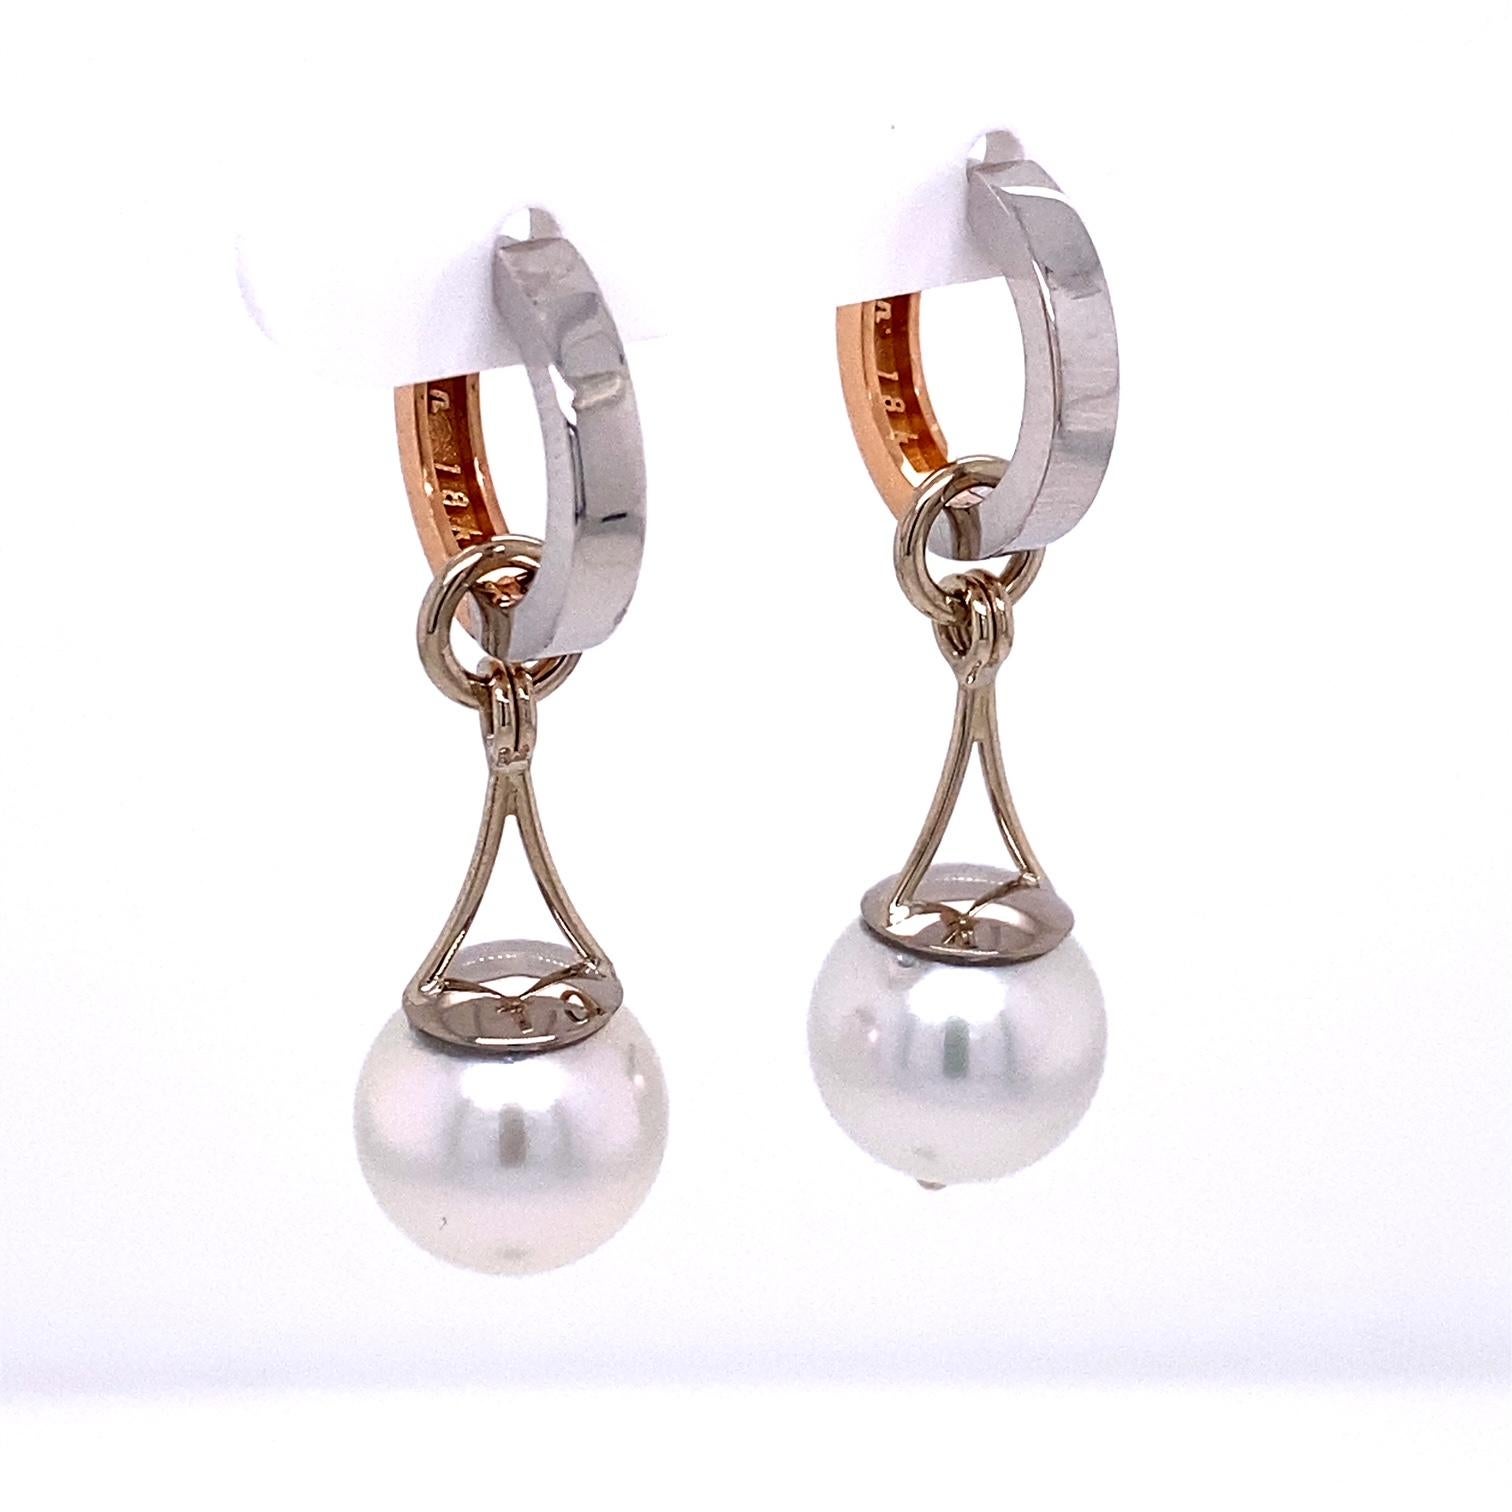 A pair of 18k Rose and white gold reversible huggie earrings, with a pair of 18k white gold jackets set with 10.9mm South Sea silver white pearls. These earrings were made and designed by llyn strong.
Items sold separately upon request.